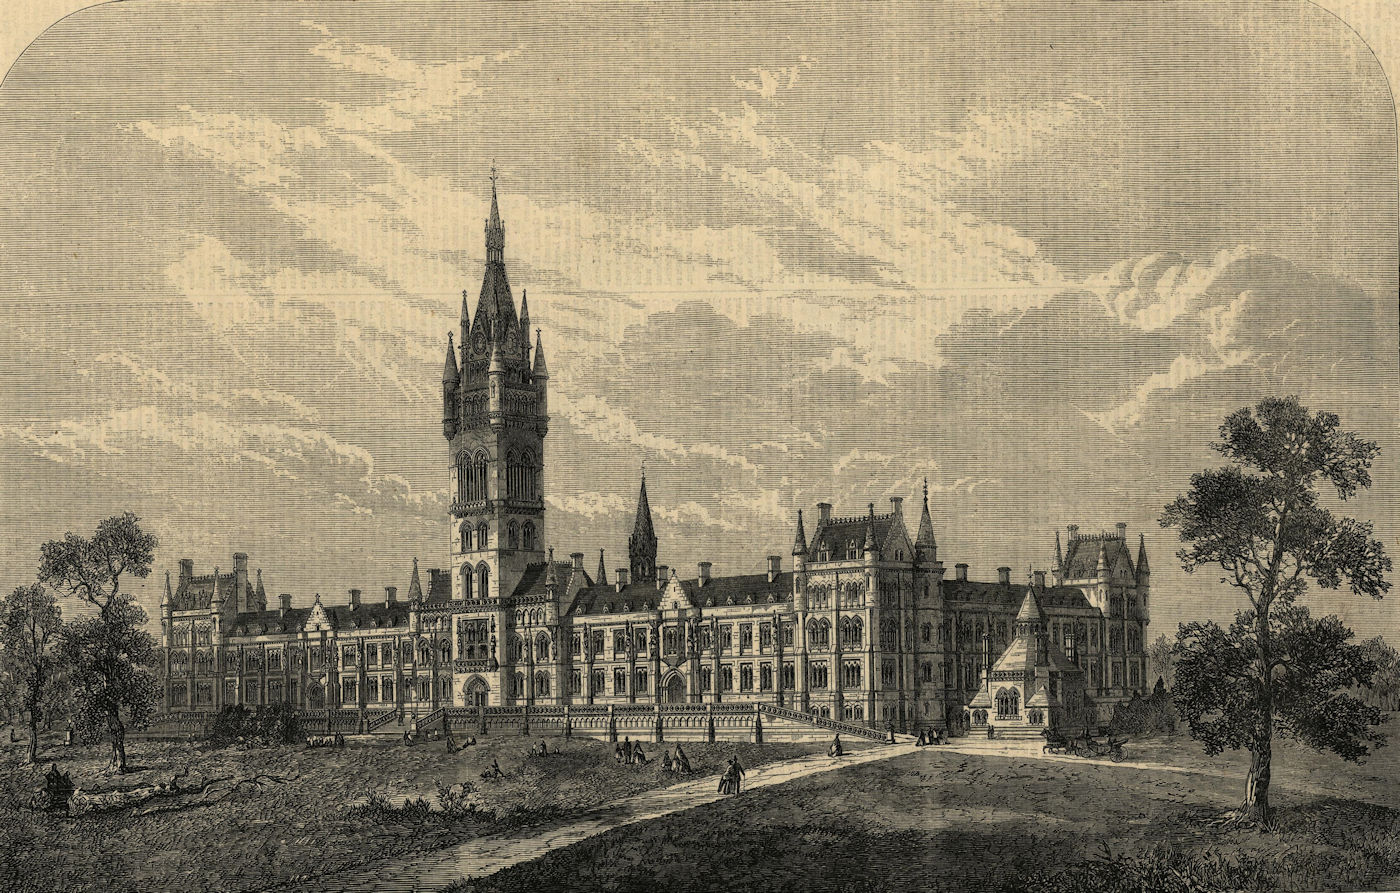 The Glasgow University: intended new buildings. Scotland. Education 1866